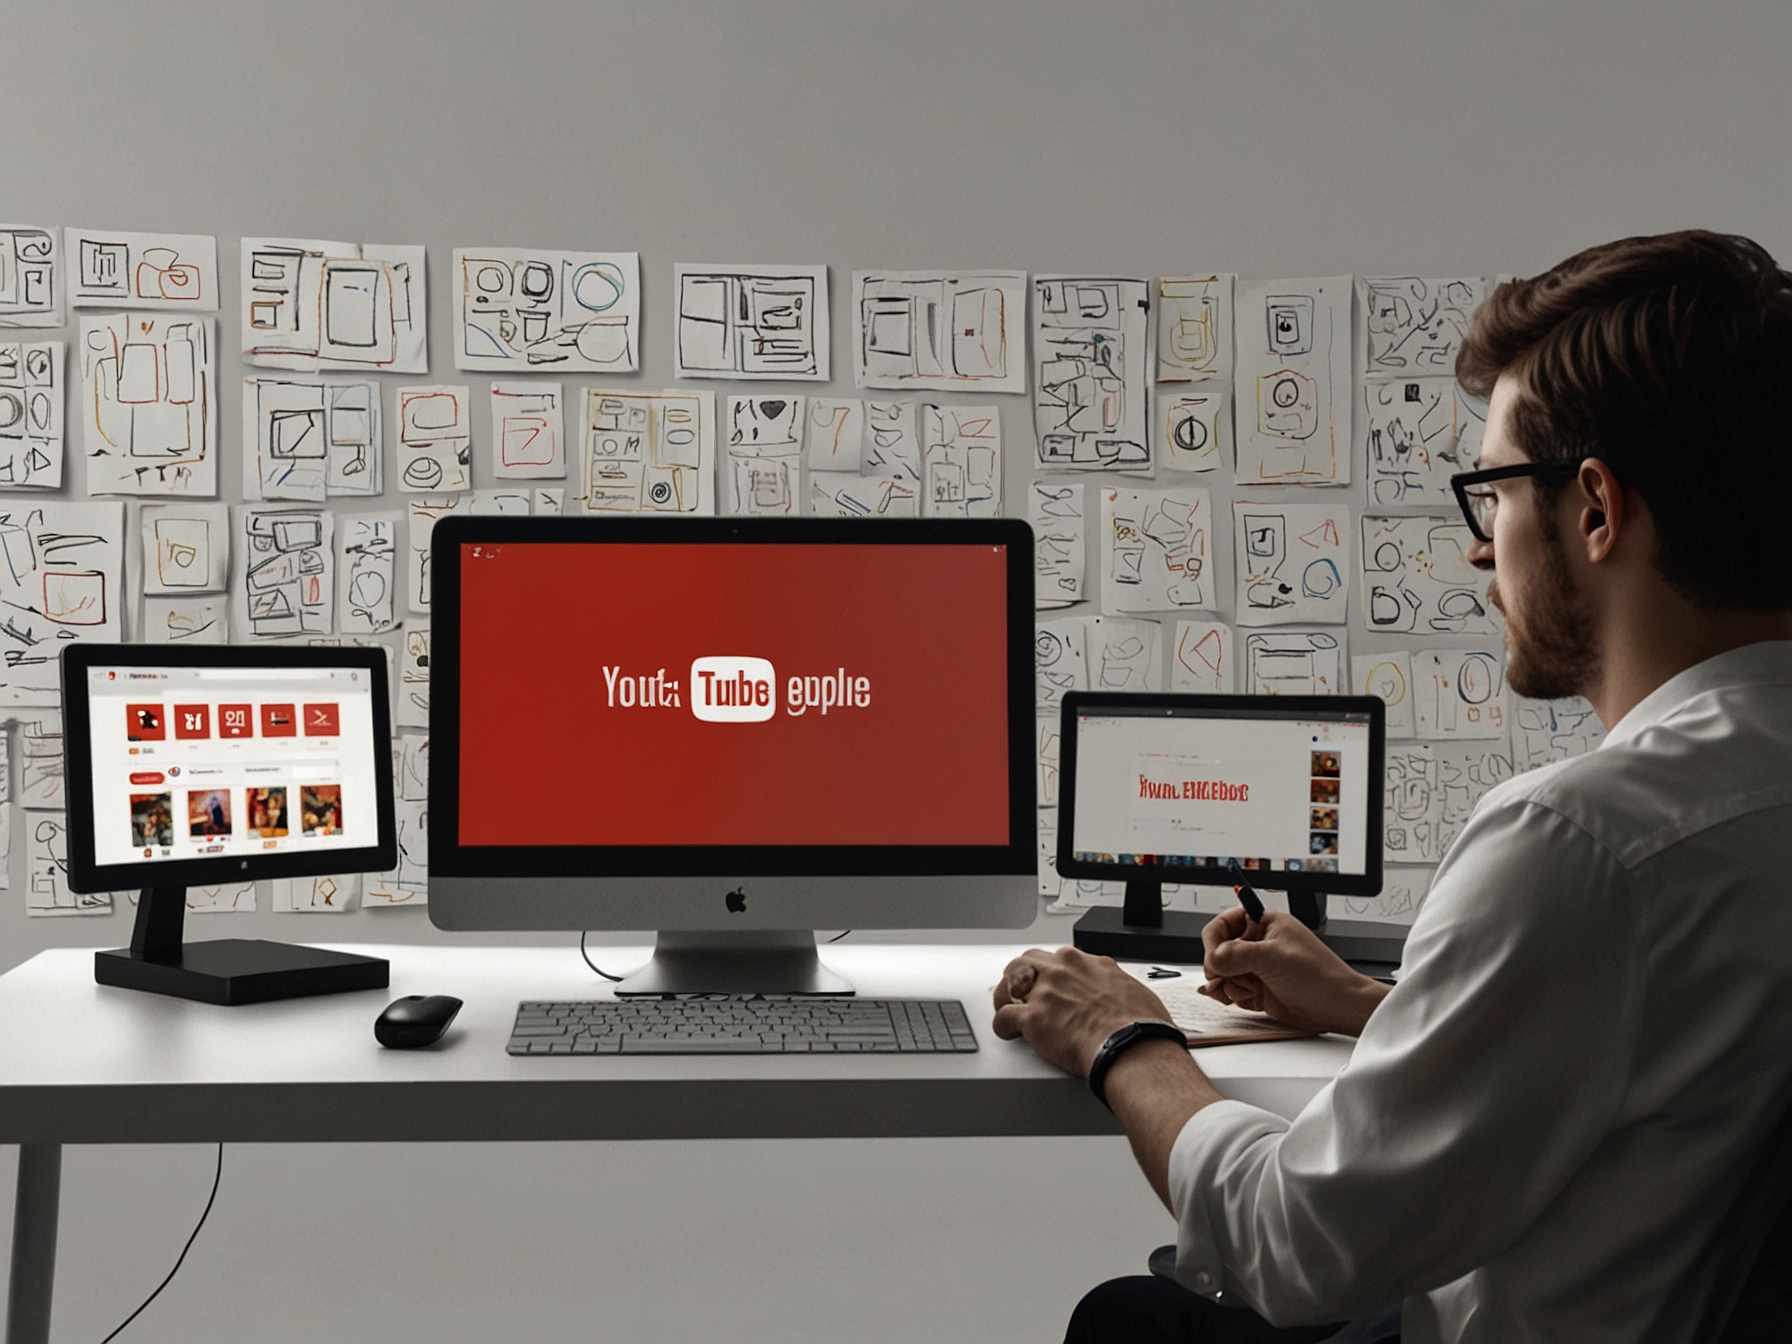 Depiction of users accessing YouTube on various devices such as smartphones, tablets, and smart TVs, showcasing its user-friendly interface and cross-platform accessibility.